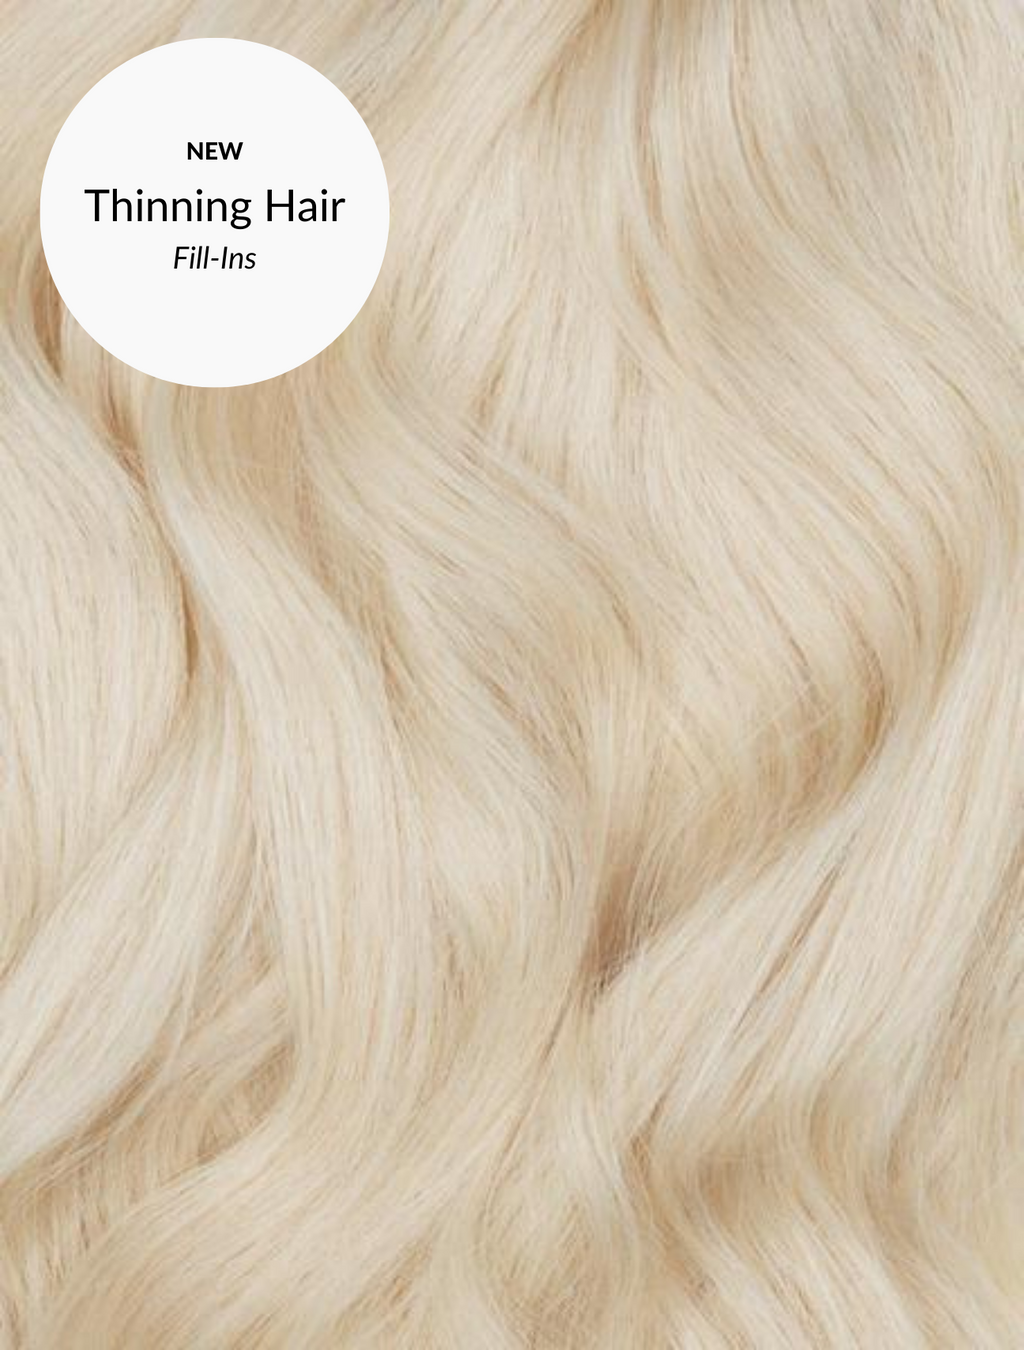 Ash Blonde (60) Thinning Hair Fill-Ins